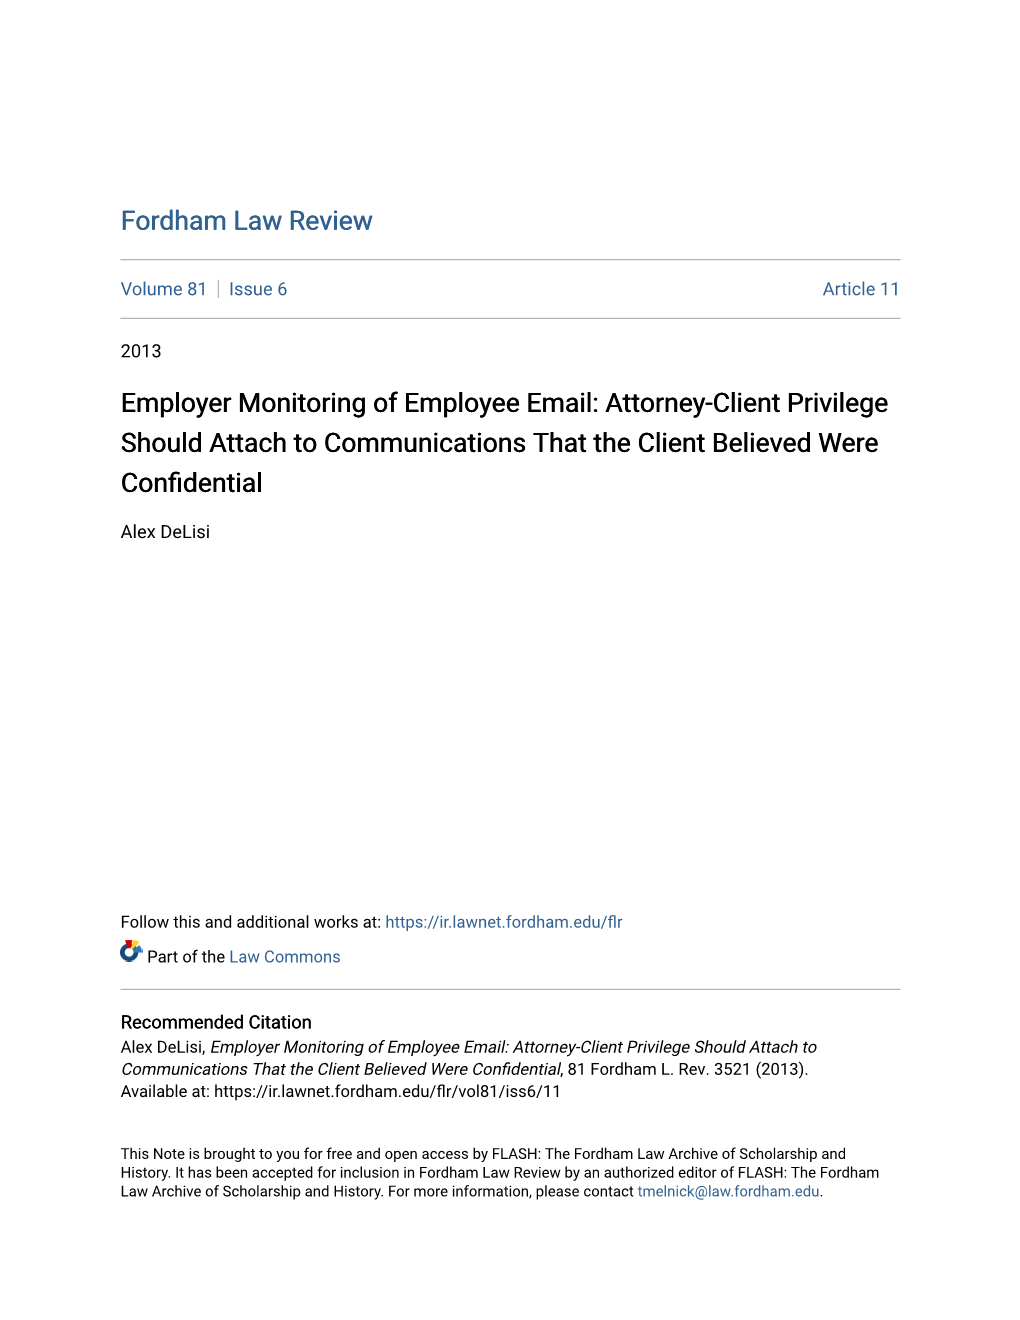 Employer Monitoring of Employee Email: Attorney-Client Privilege Should Attach to Communications That the Client Believed Were Confidential